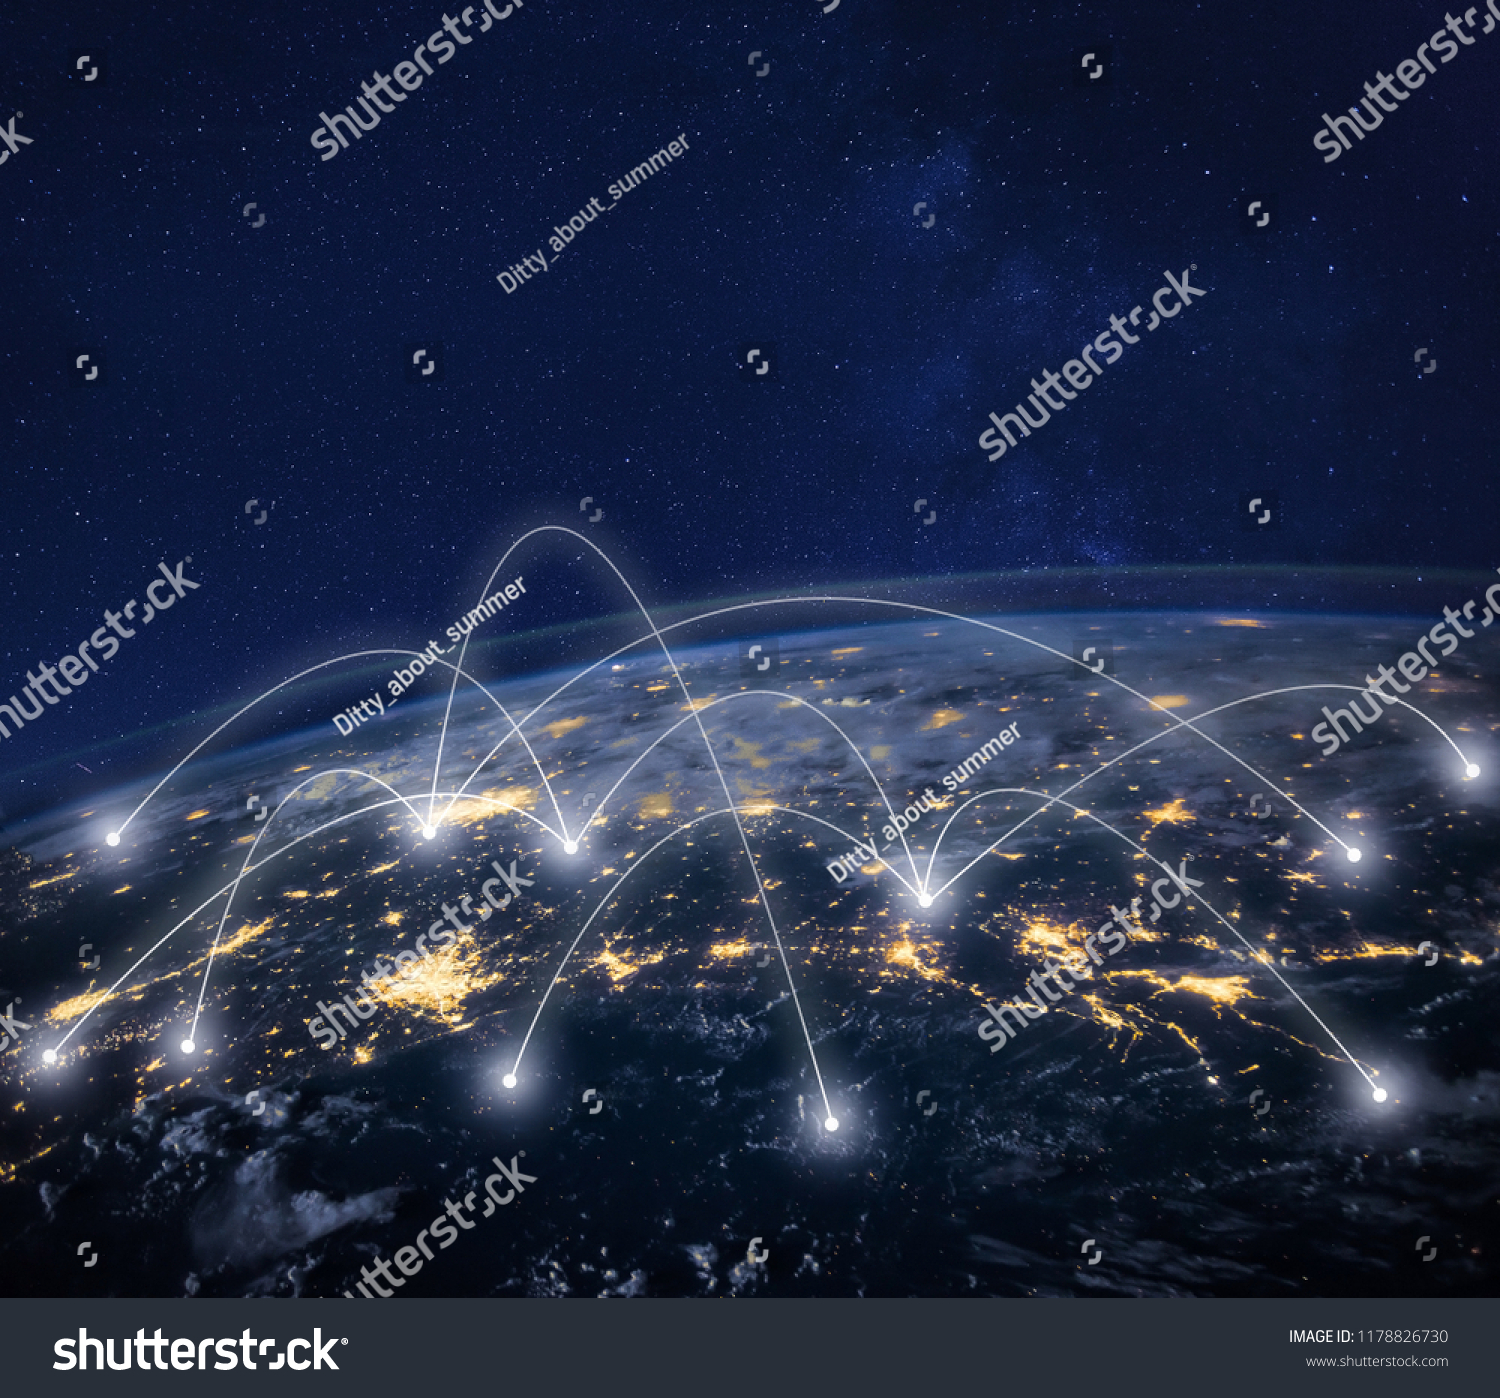 network connection technology, global business communication, planet image from NASA #1178826730